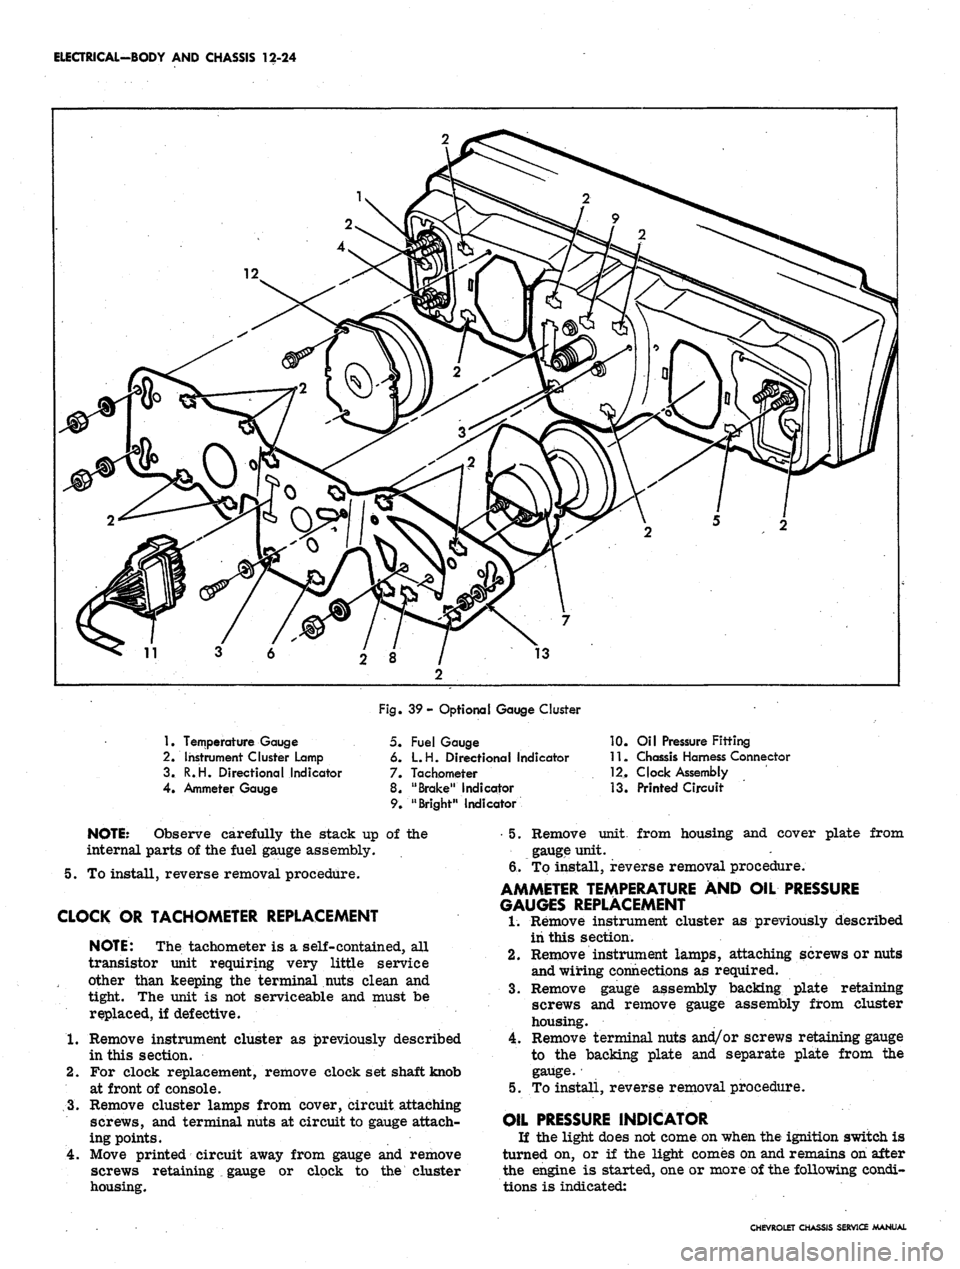 CHEVROLET CAMARO 1967 1.G Chassis Workshop Manual 
ELECTRICAL-BODY AND CHASSIS 12-24

1.
 Temperature Gauge

2.
 Instrument Cluster Lamp

3.
 R.H. Directional Indicator

4.
 Ammeter Gauge 
Fig. 39- Optional Gauge Cluster

5. Fuel Gauge

6. L.H. Direc